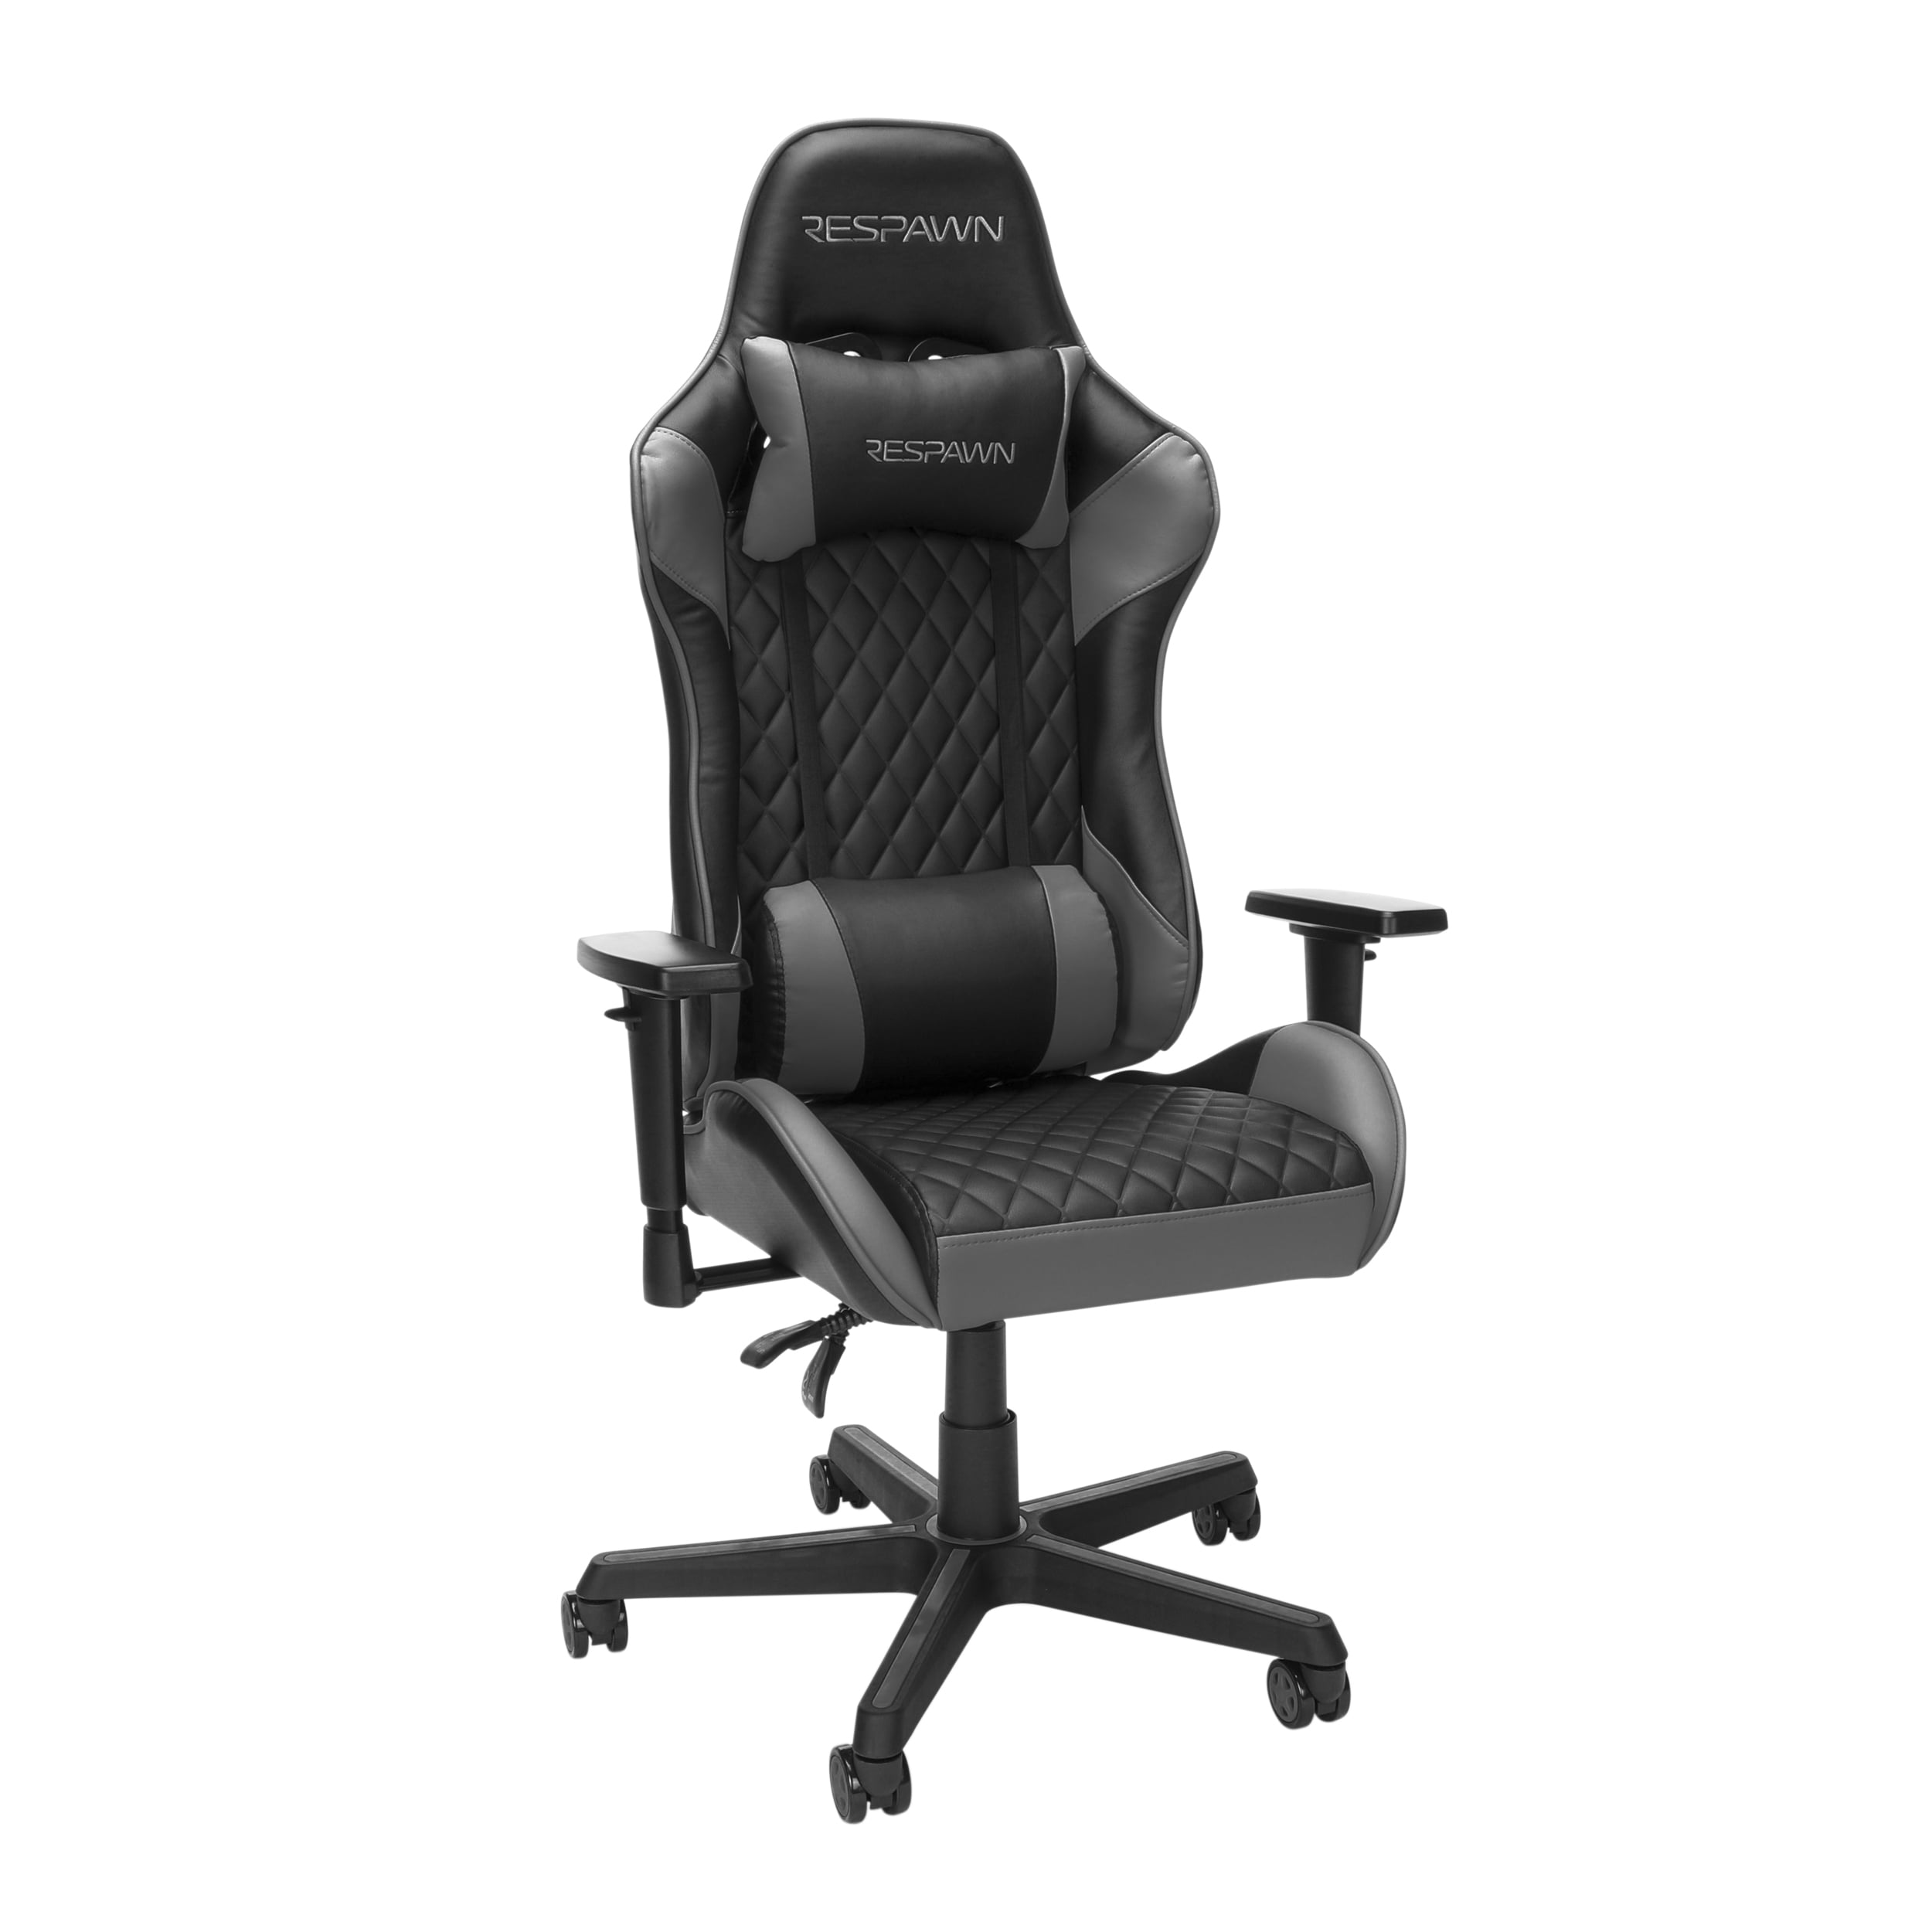 Green for sale online RESPAWN RSP-110-GRN Racing Style Gaming Chair 